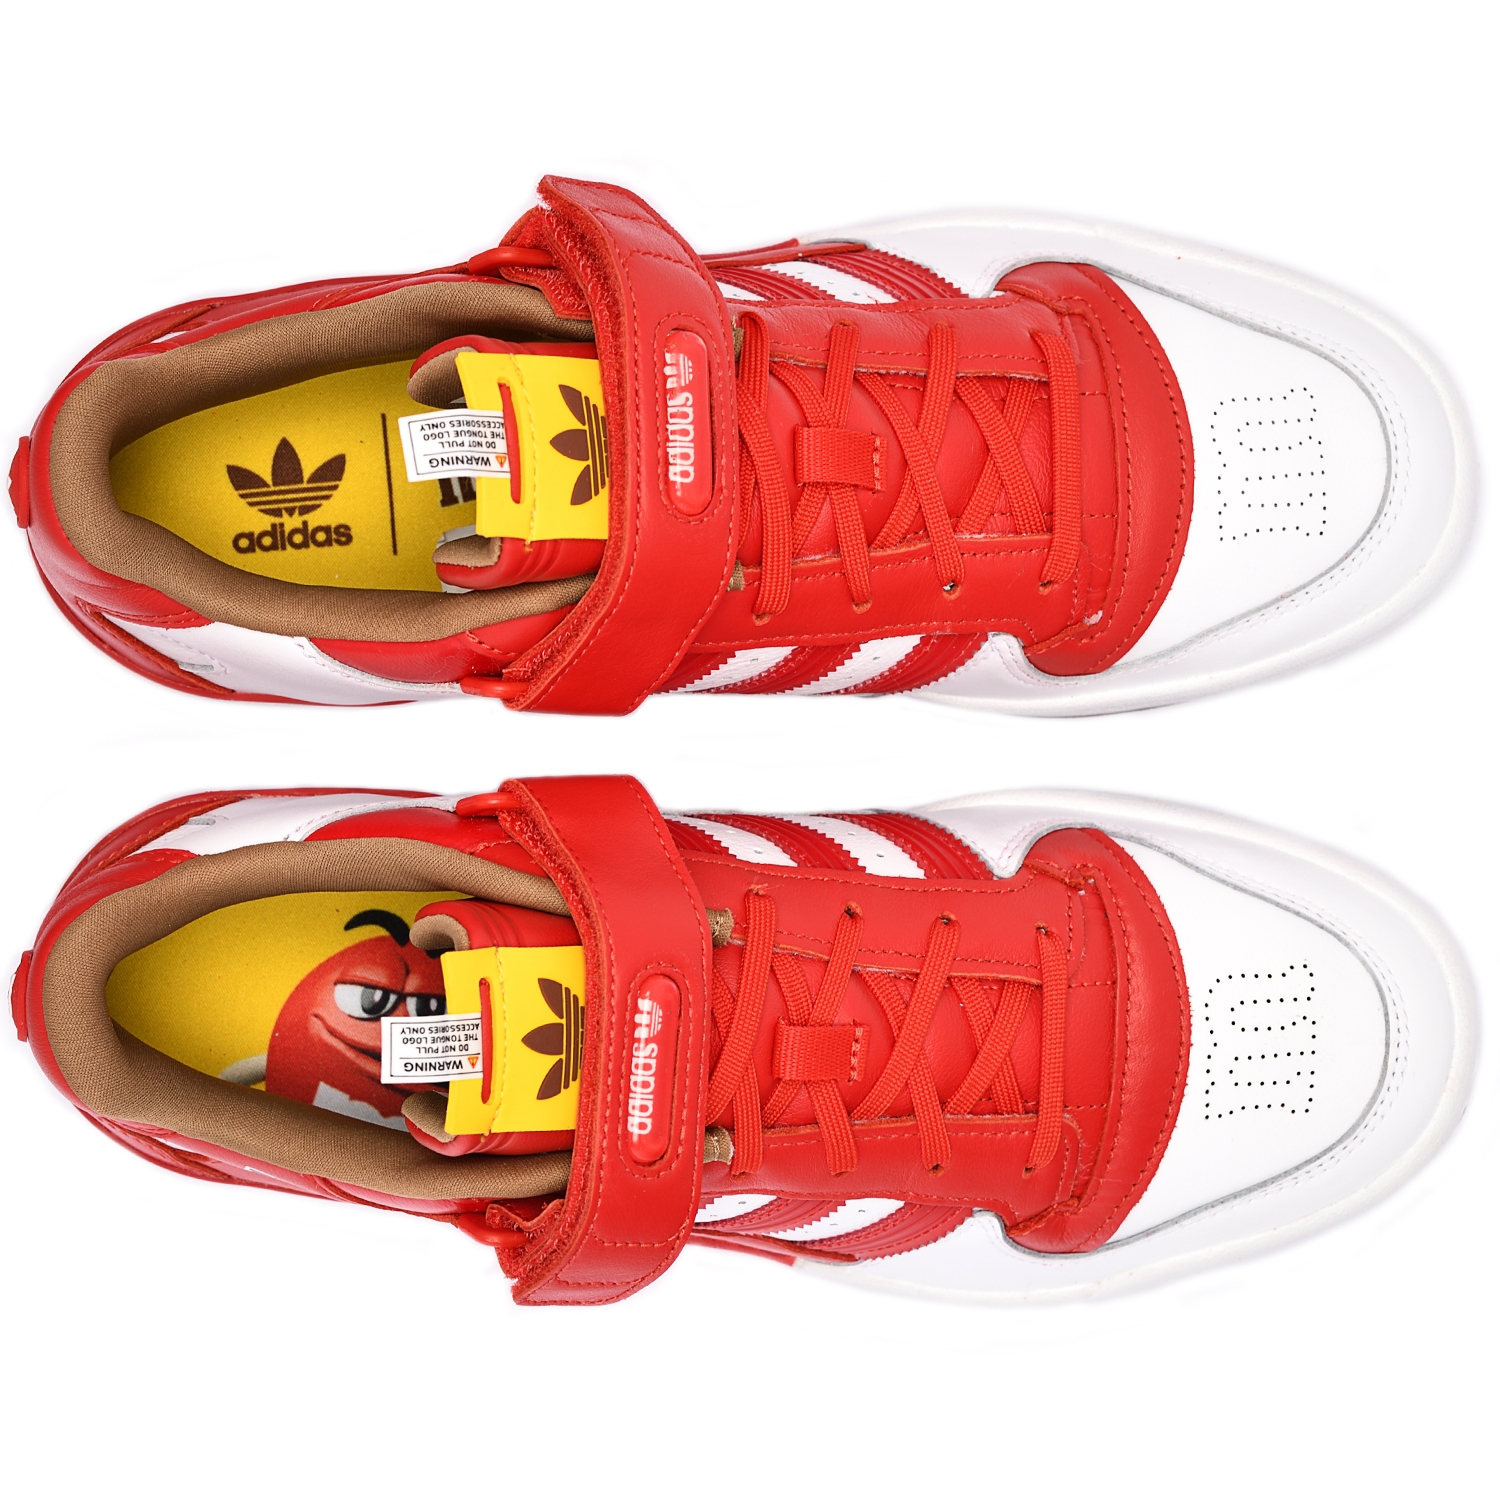 adidas x m&m's brand Forum 84 Low Red / Cloud White / Eqt Yellow